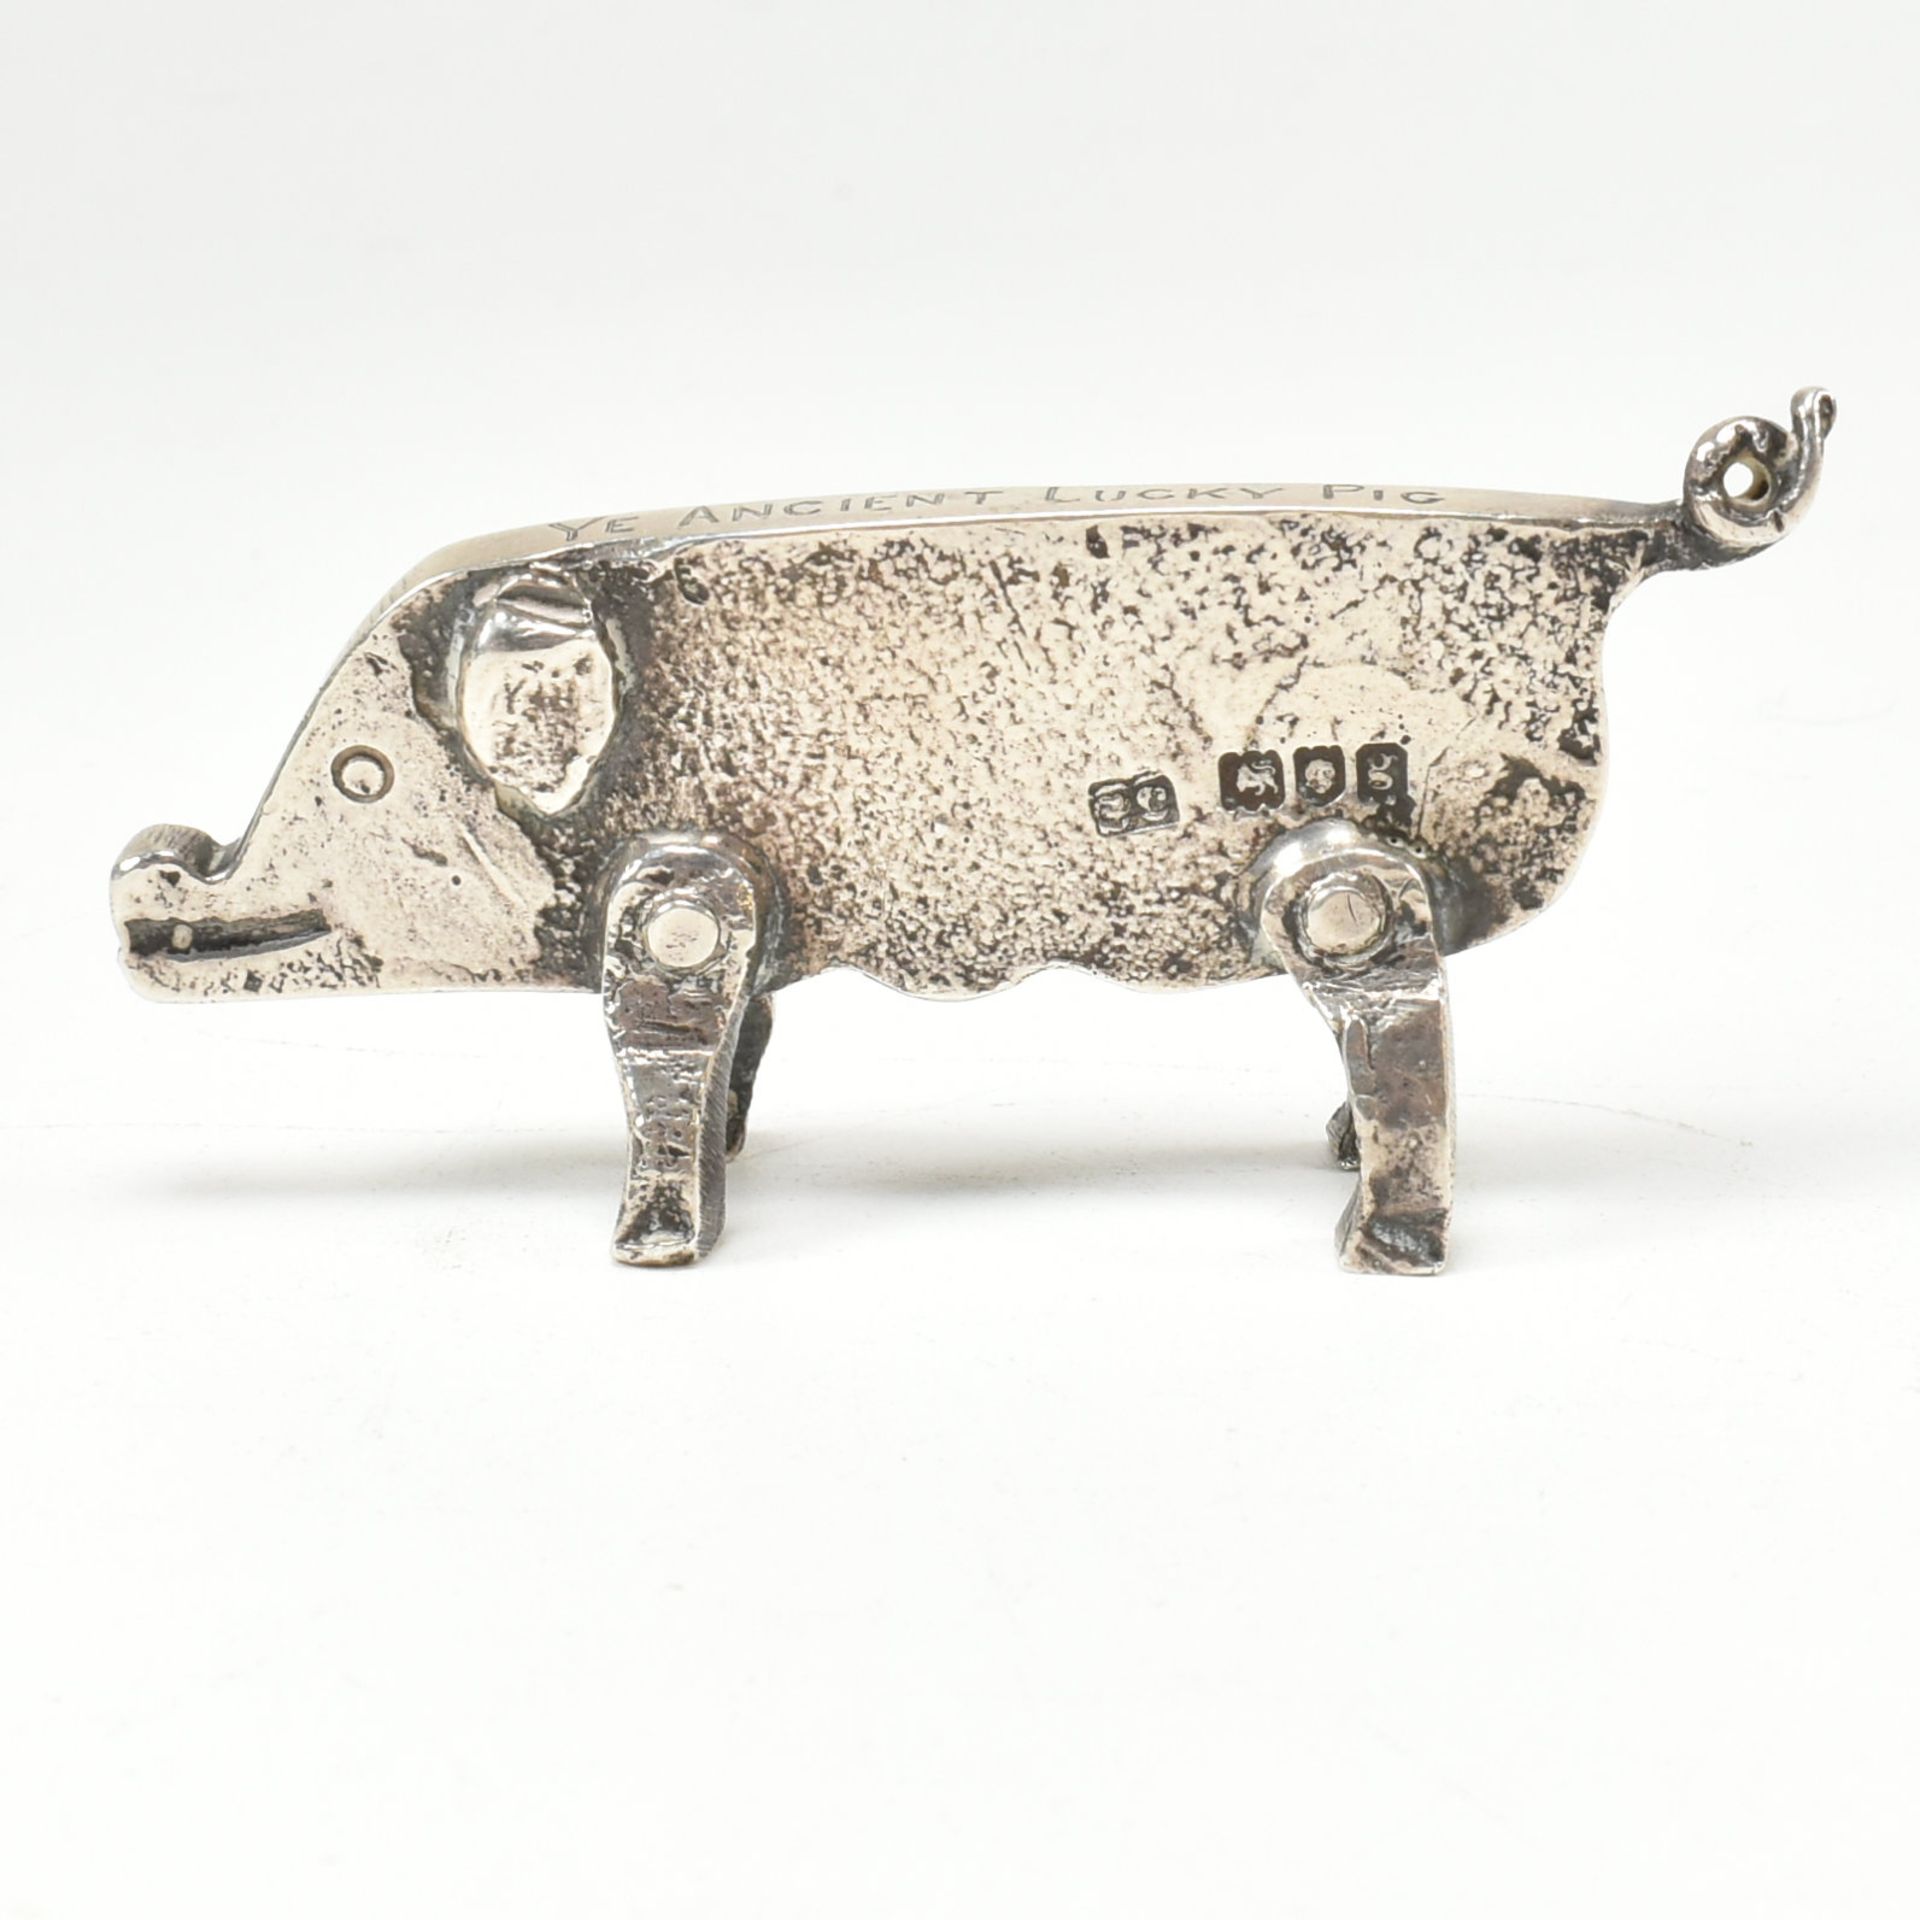 ARTS & CRAFTS EARLY 20TH CENTURY LUCKY PIG FIGURINE - Image 3 of 6